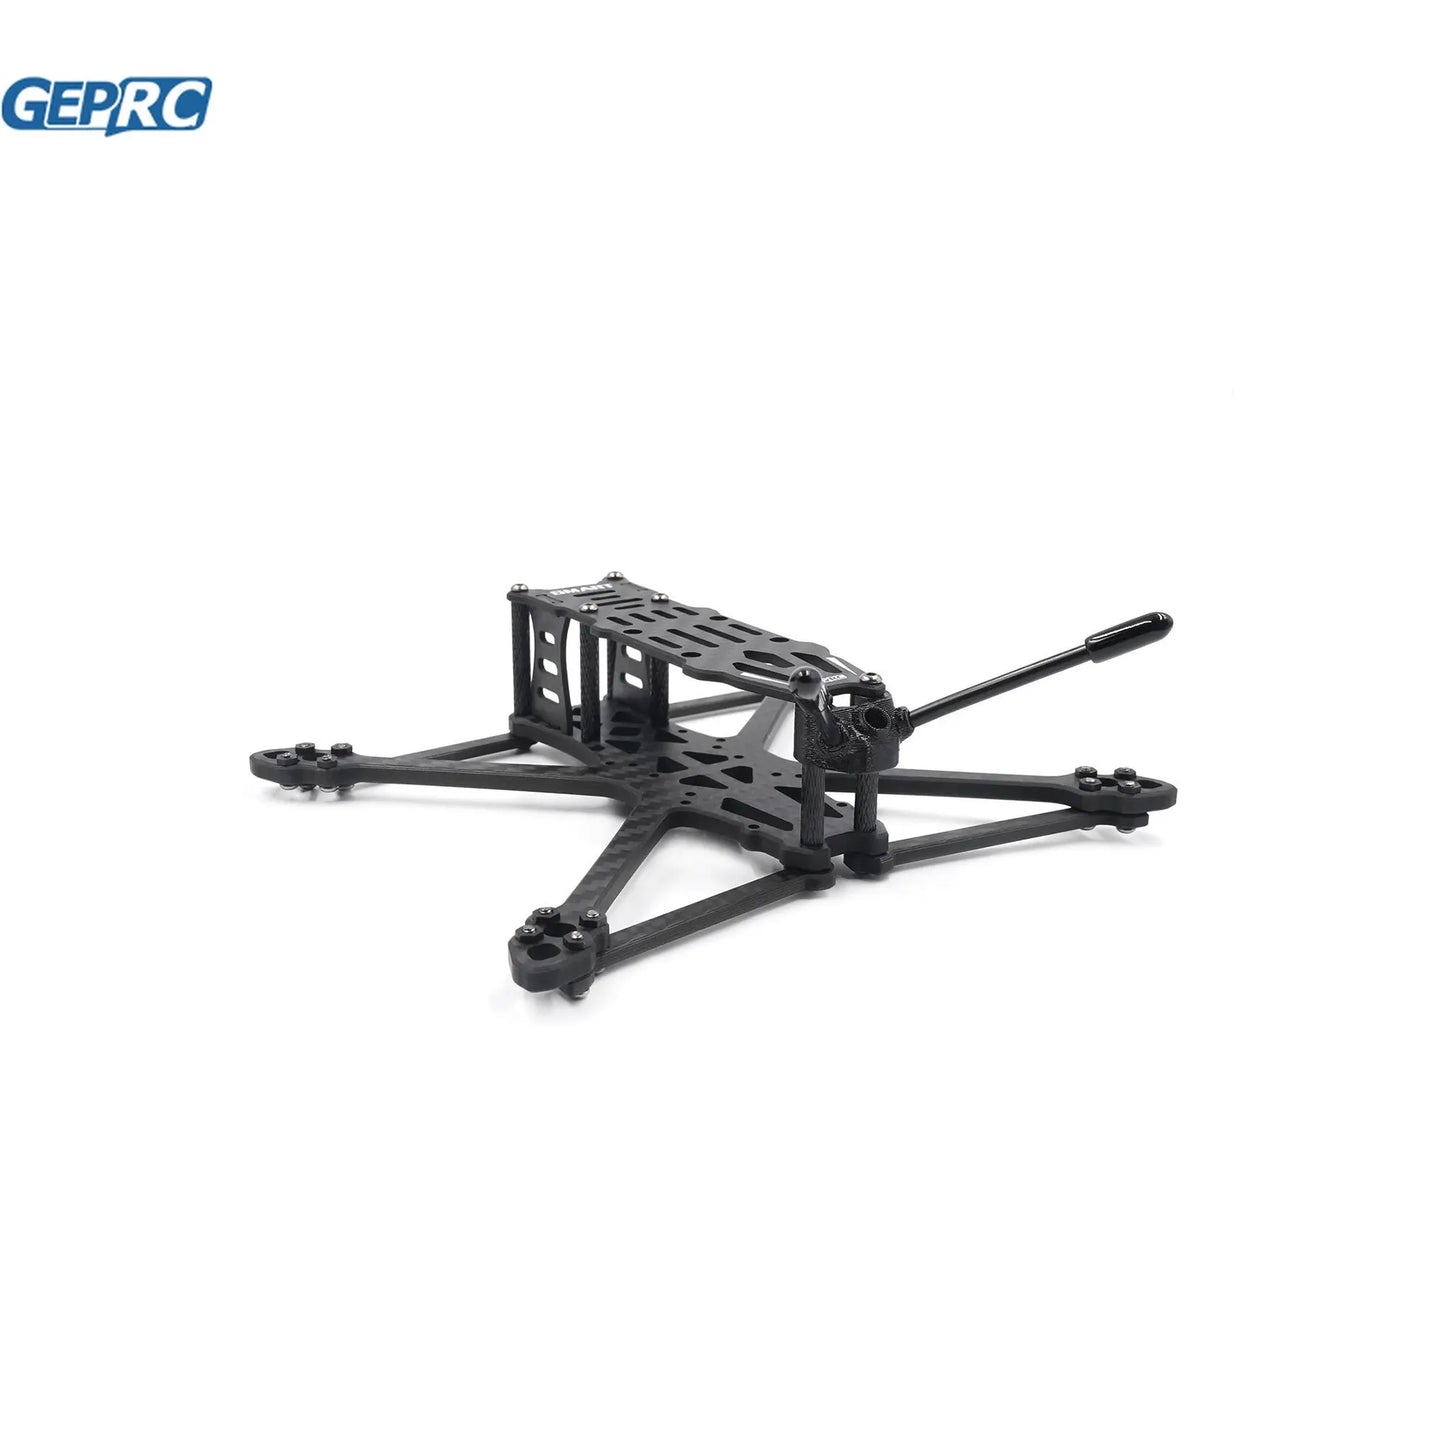 GEPRC GEP-ST35 Frame - Suitable For Smart 35 Series Drone Carbon Fiber Frame For RC FPV Quadcopter Replacement Accessories Parts